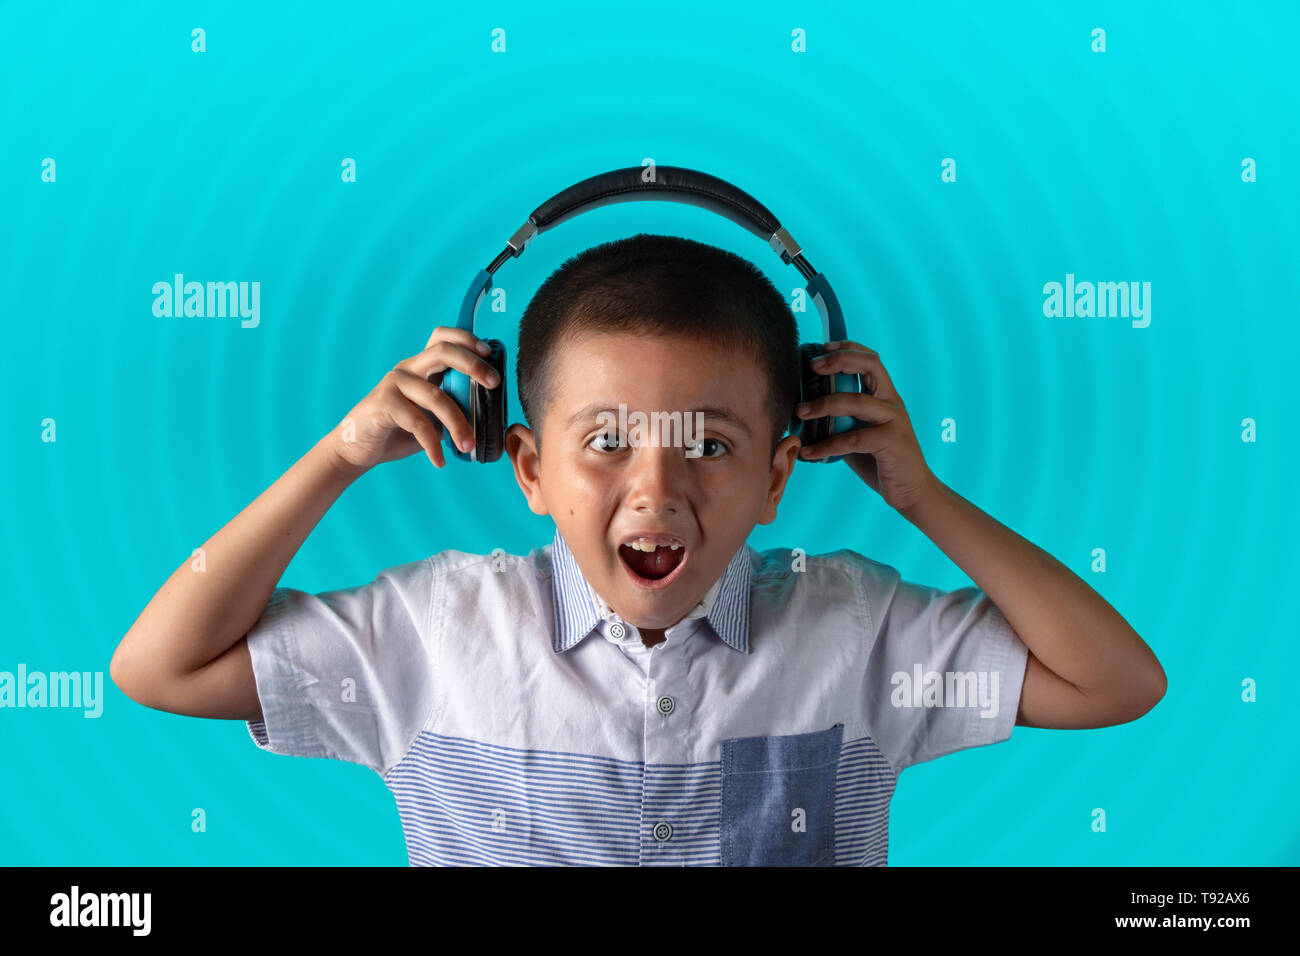 Young boy holding and looking at aux cable while wearing headphones.  Music concept image with copy space for text. Stock Photo